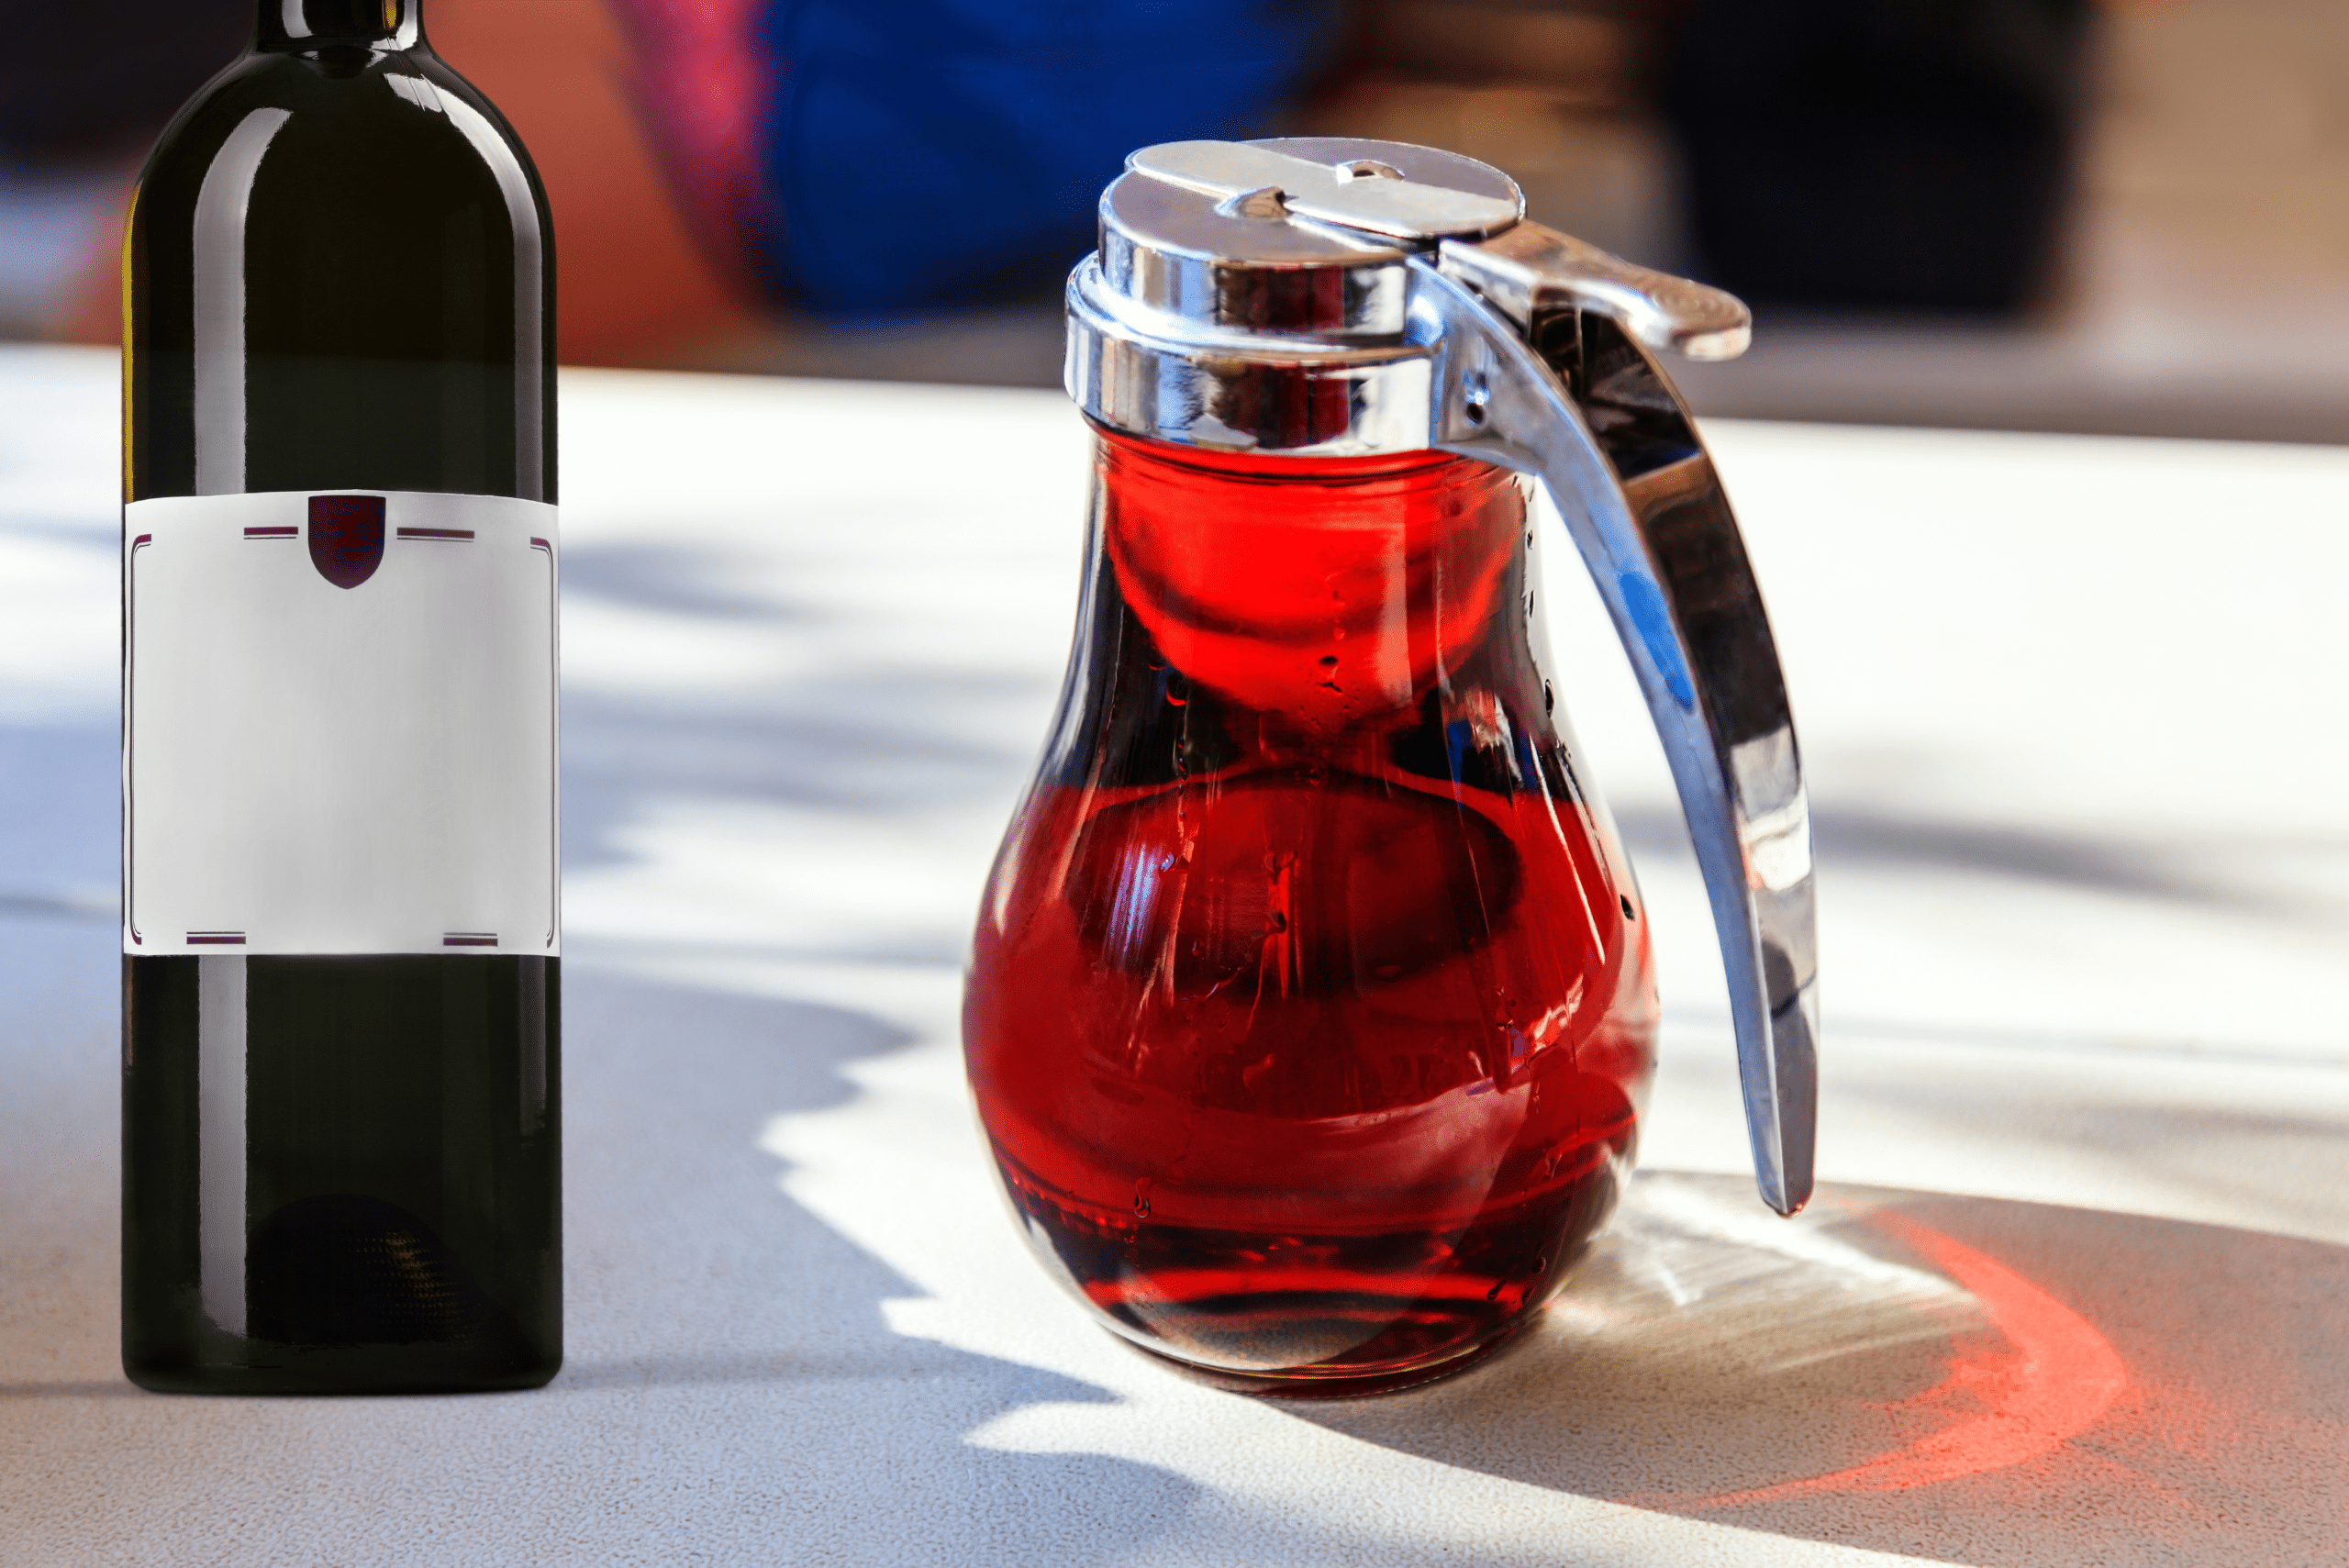 A bottle of wine and maple syrup on table.